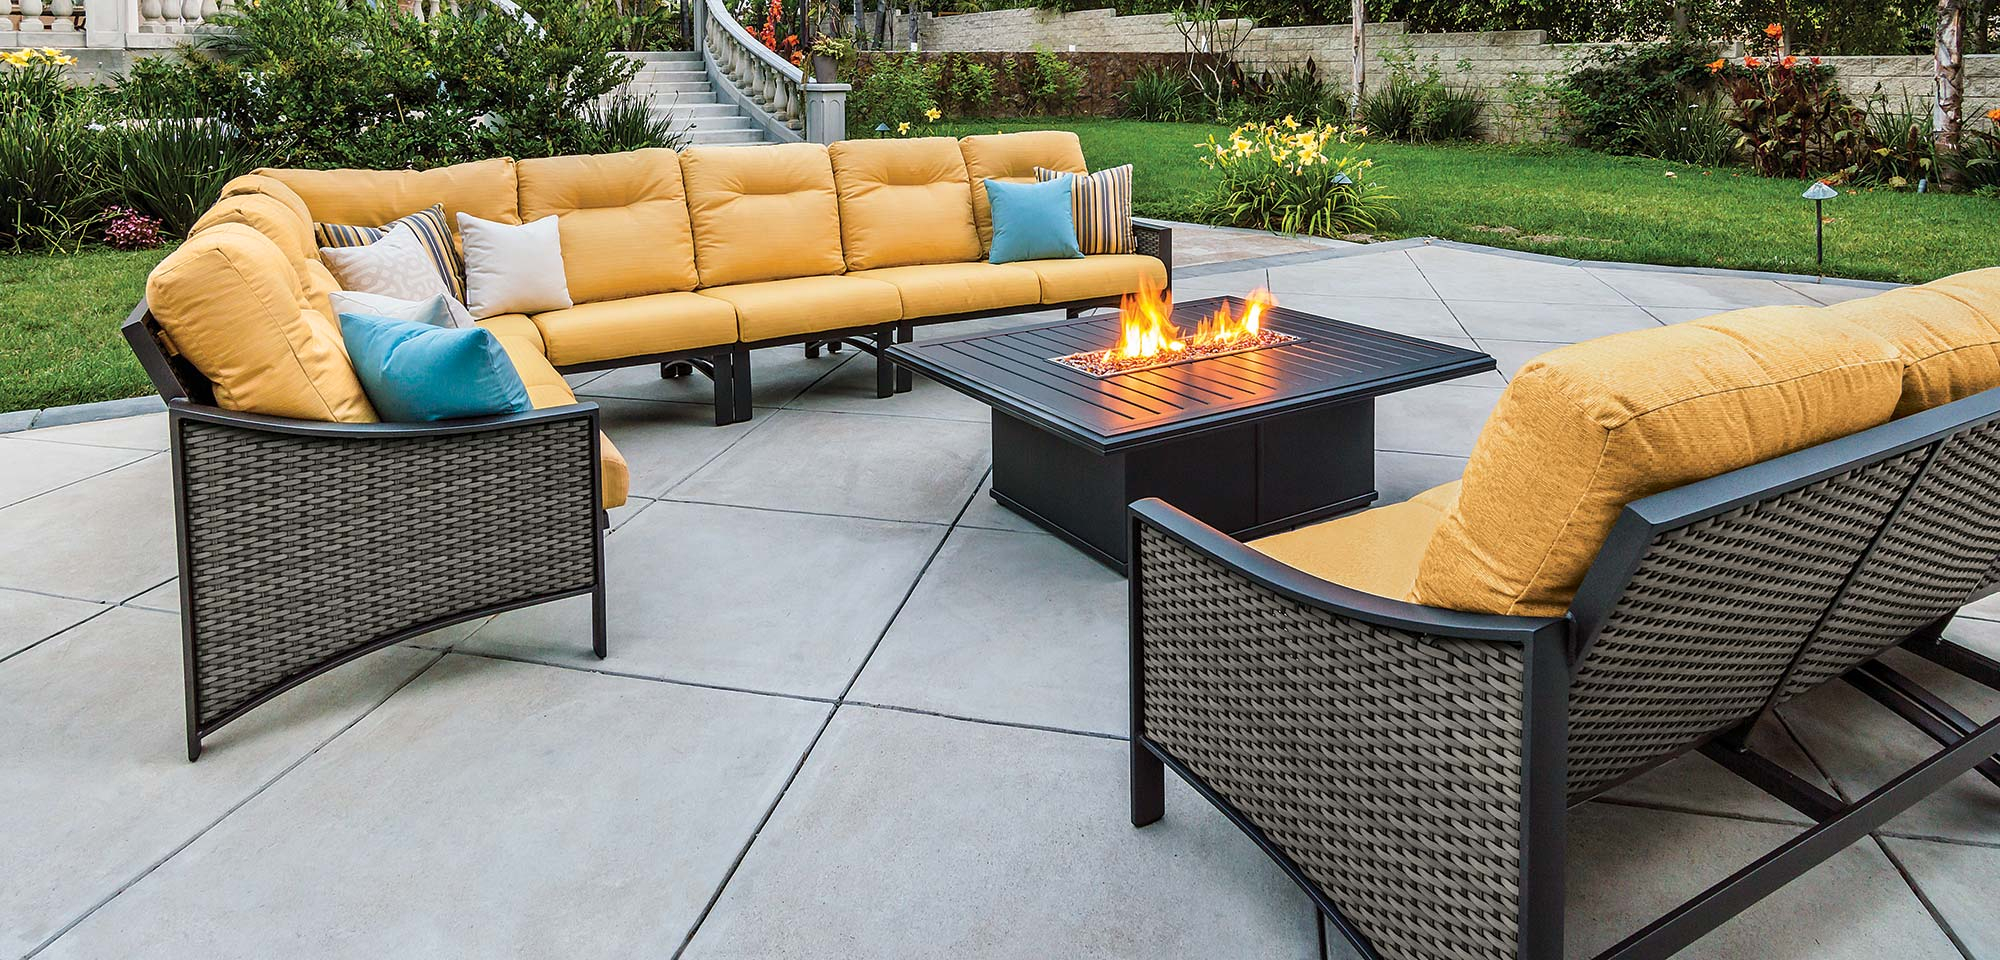 Patio Furniture Outdoor Patio Furniture Sets throughout dimensions 2000 X 9...